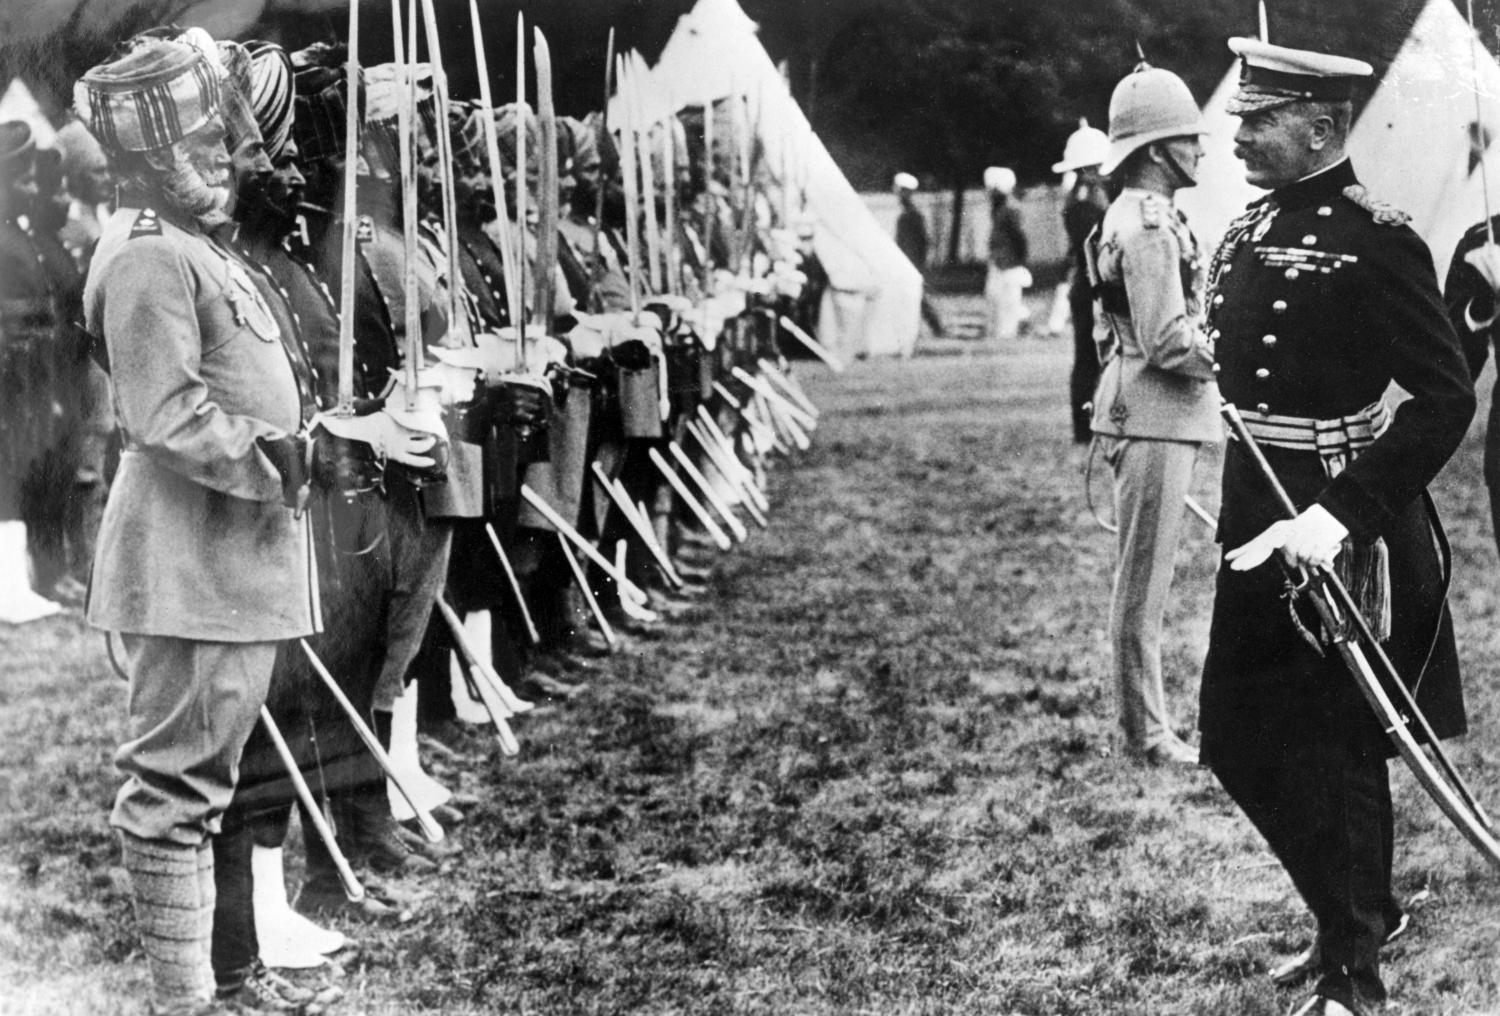 Lord Herbert Kitchener (1850-1916) reviewing Indian troops during the First World War. 800,000 Indian troops fought in the war: nearly 48,000 were killed or missing and 65,000 wounded. 13,000 medals were won, including 12 VCs.